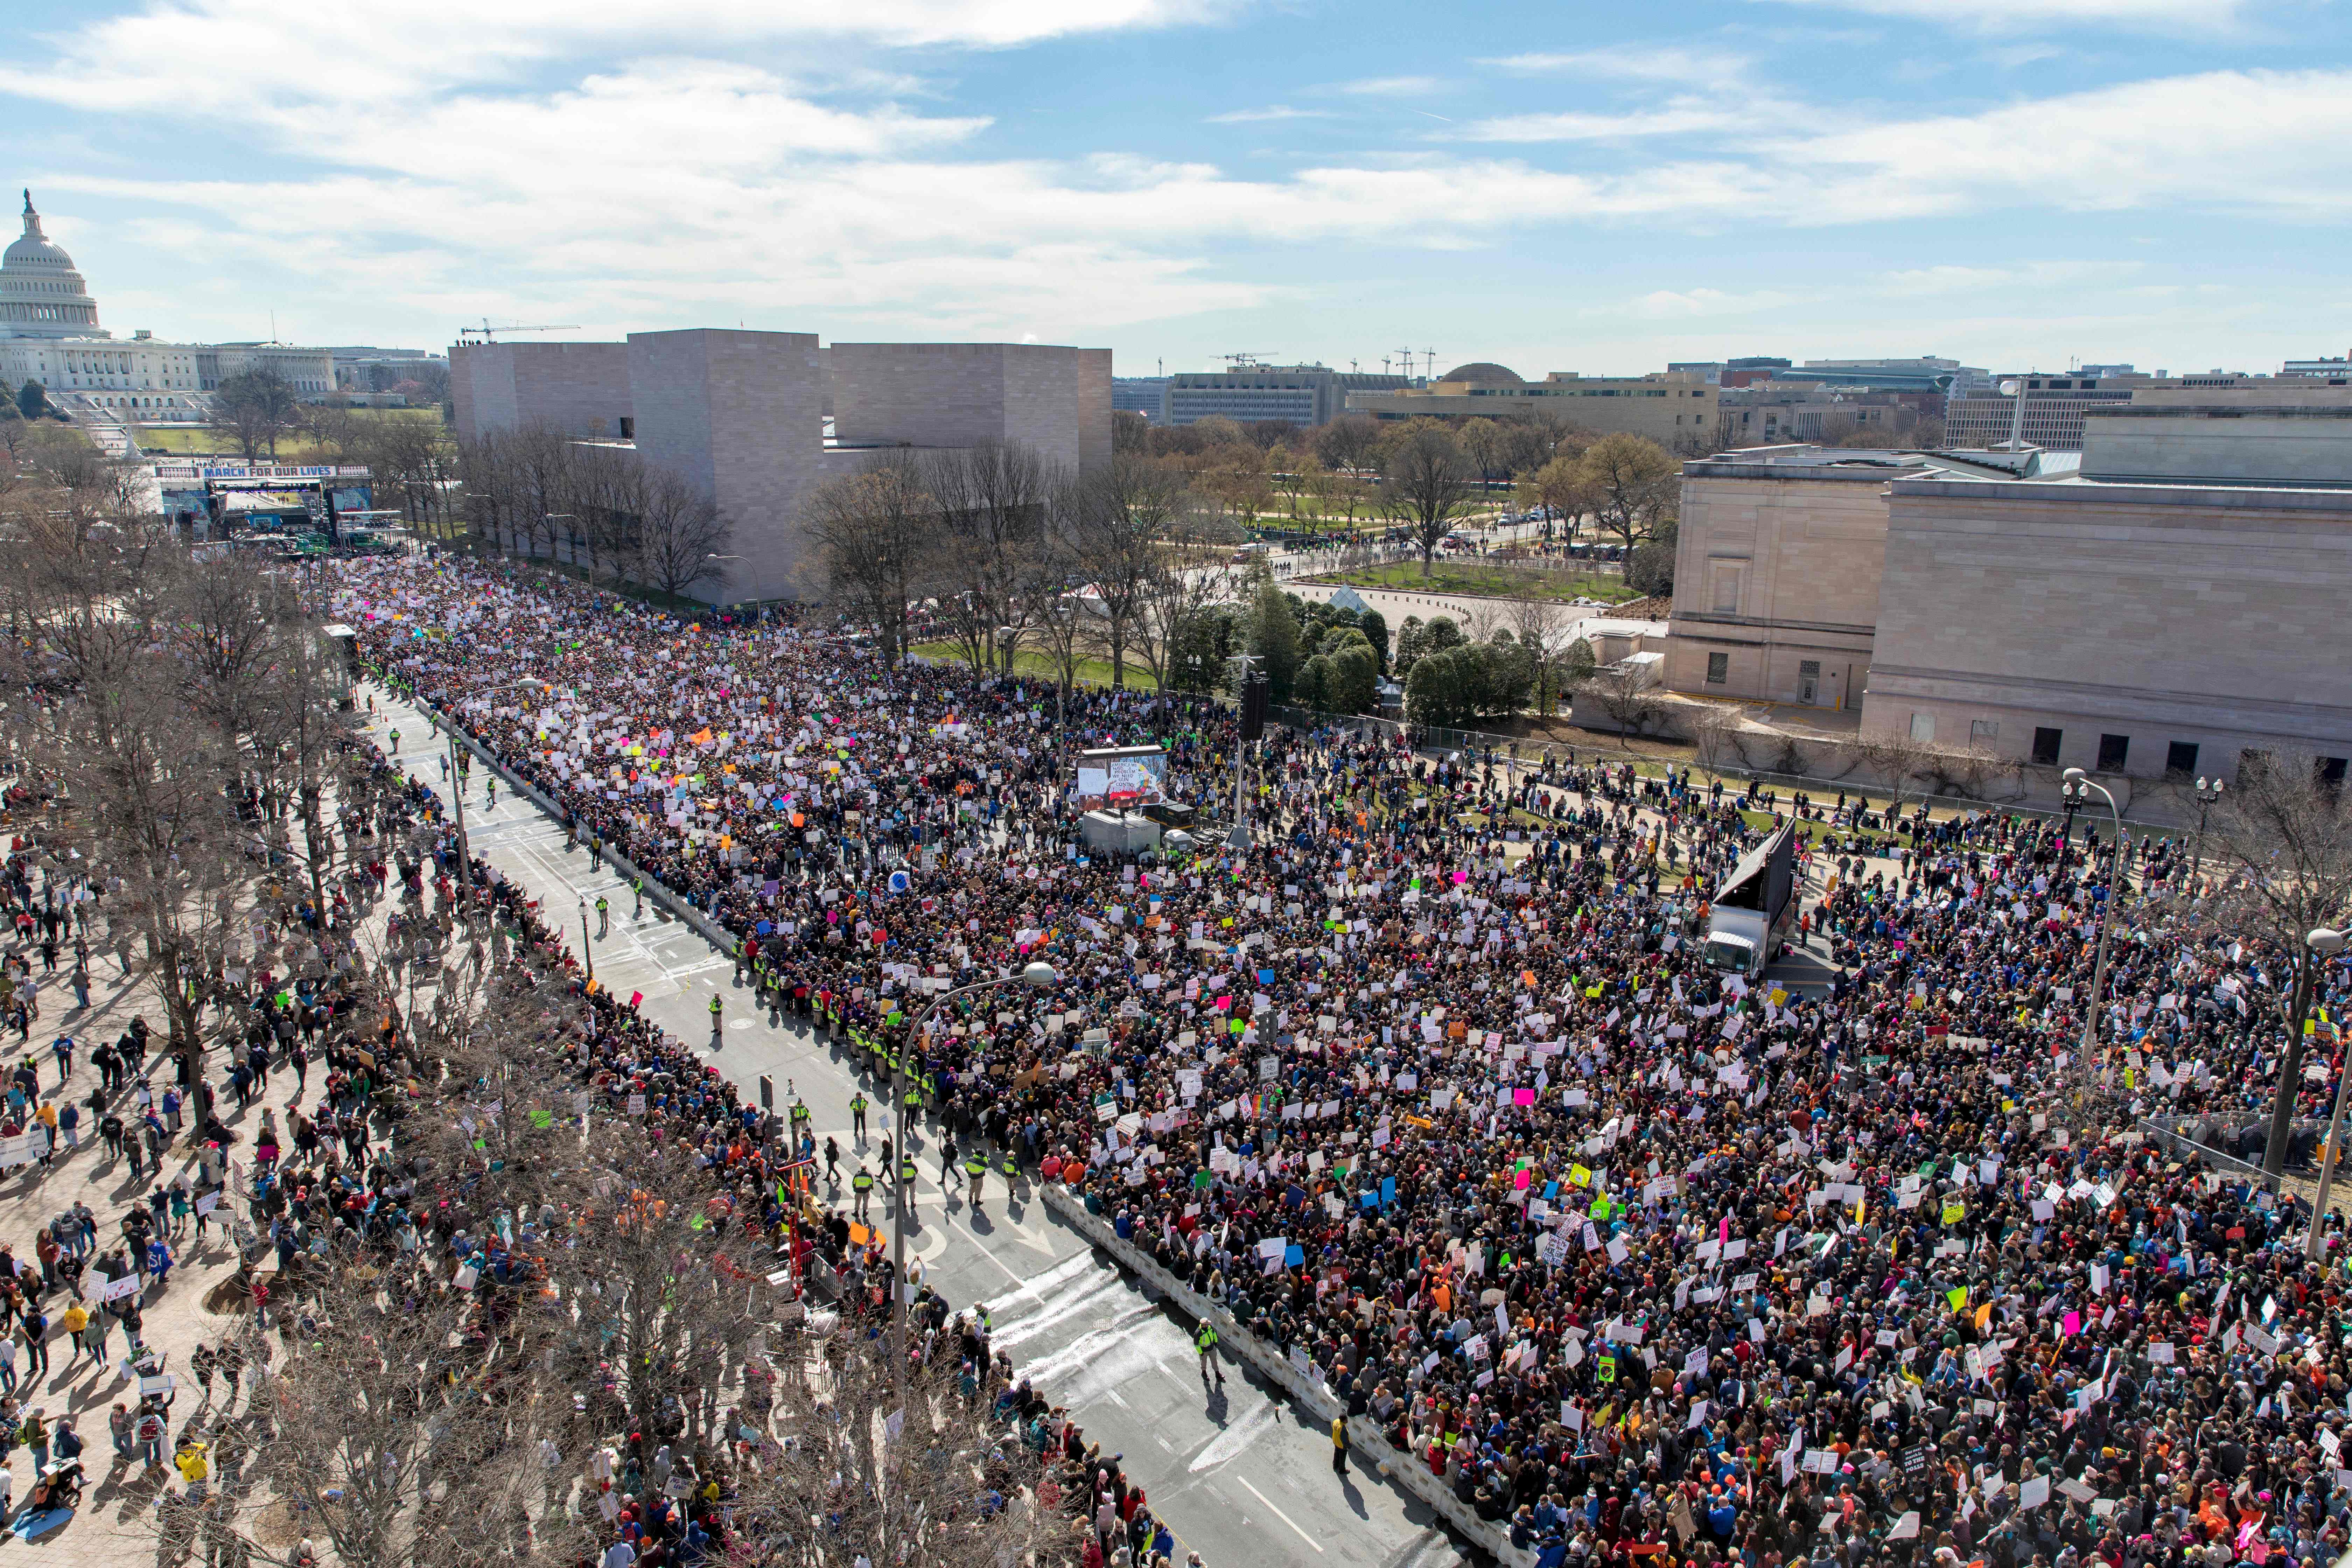 The crowd at the March for Our Lives Rally as seen from the roof of the Newseum in Washington, DC on March 24, 2018. Galvanized by a massacre at a Florida high school, hundreds of thousands of Americans are expected to take to the streets in cities across the United States on Saturday in the biggest protest for gun control in a generation. (ALEX EDELMAN/AFP/Getty Images)